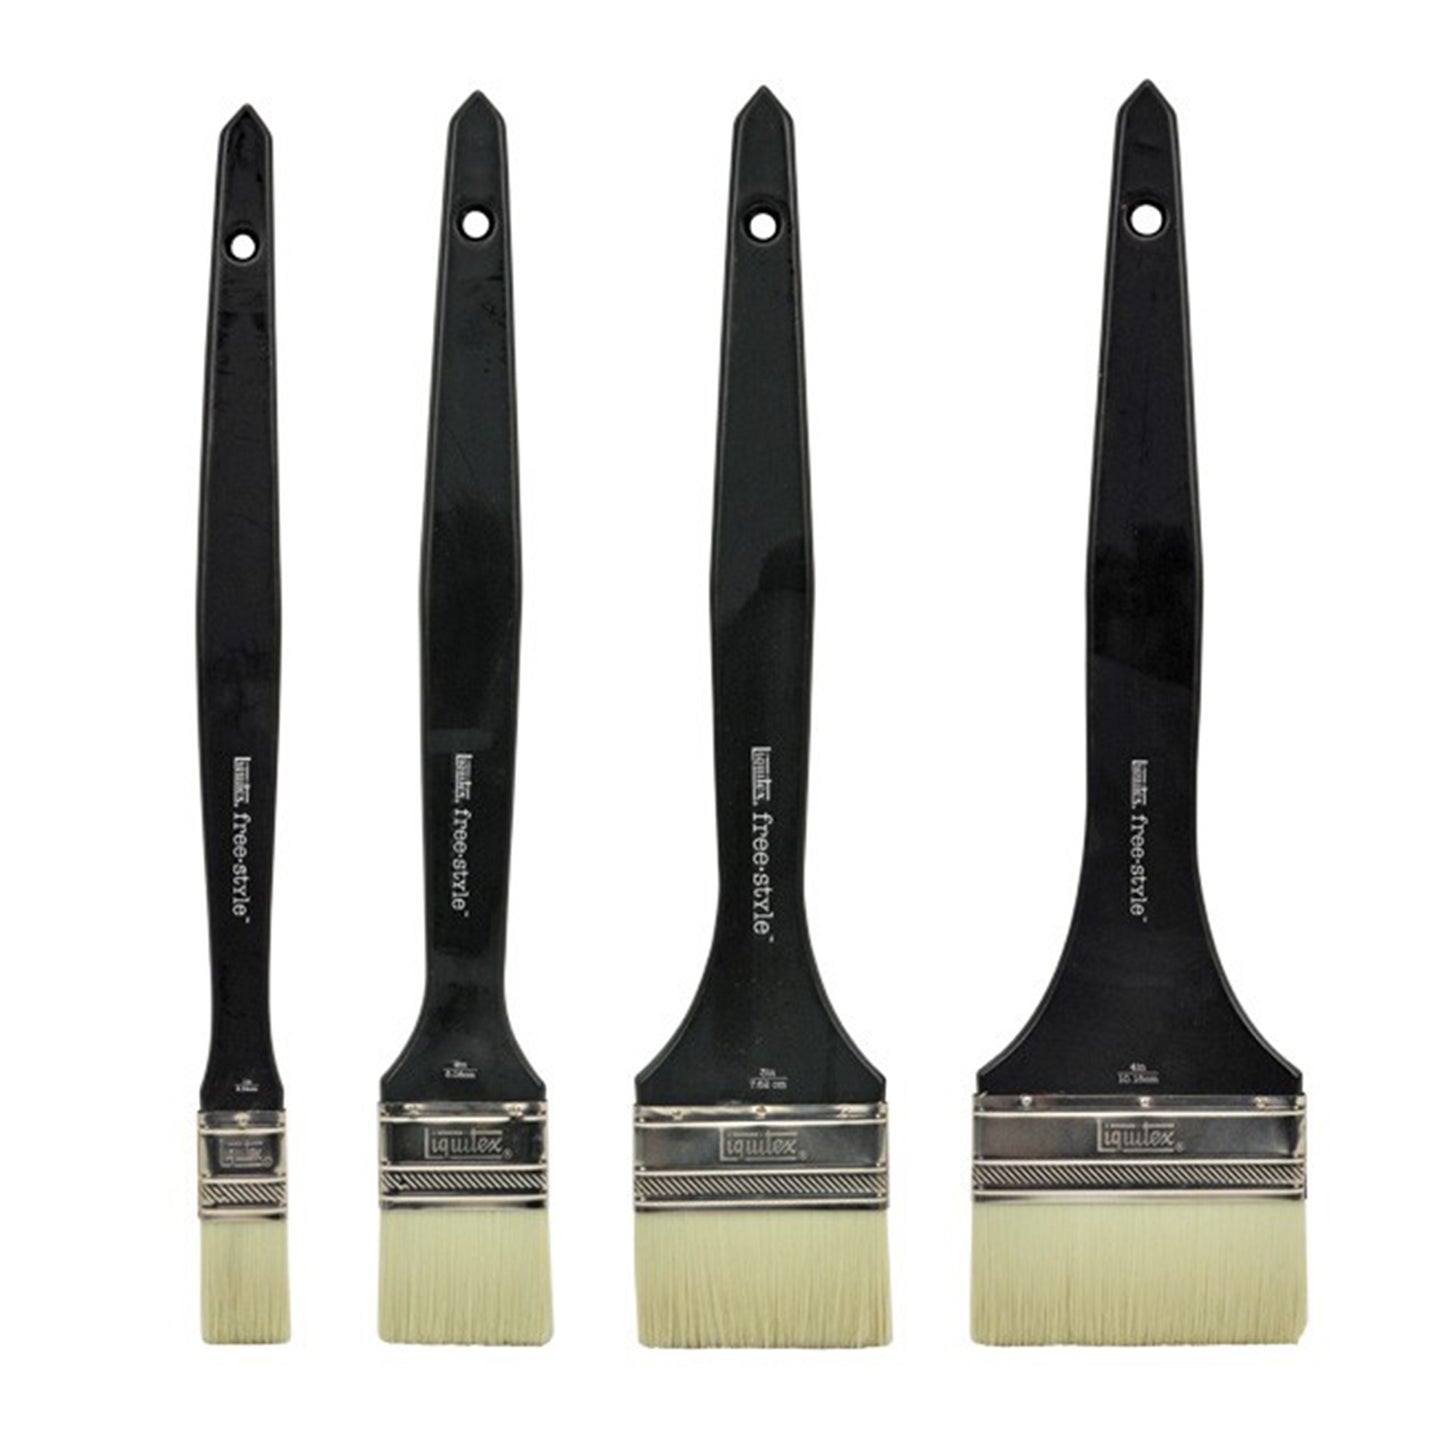 Four long paint brushes with black handles and yellow bristles.